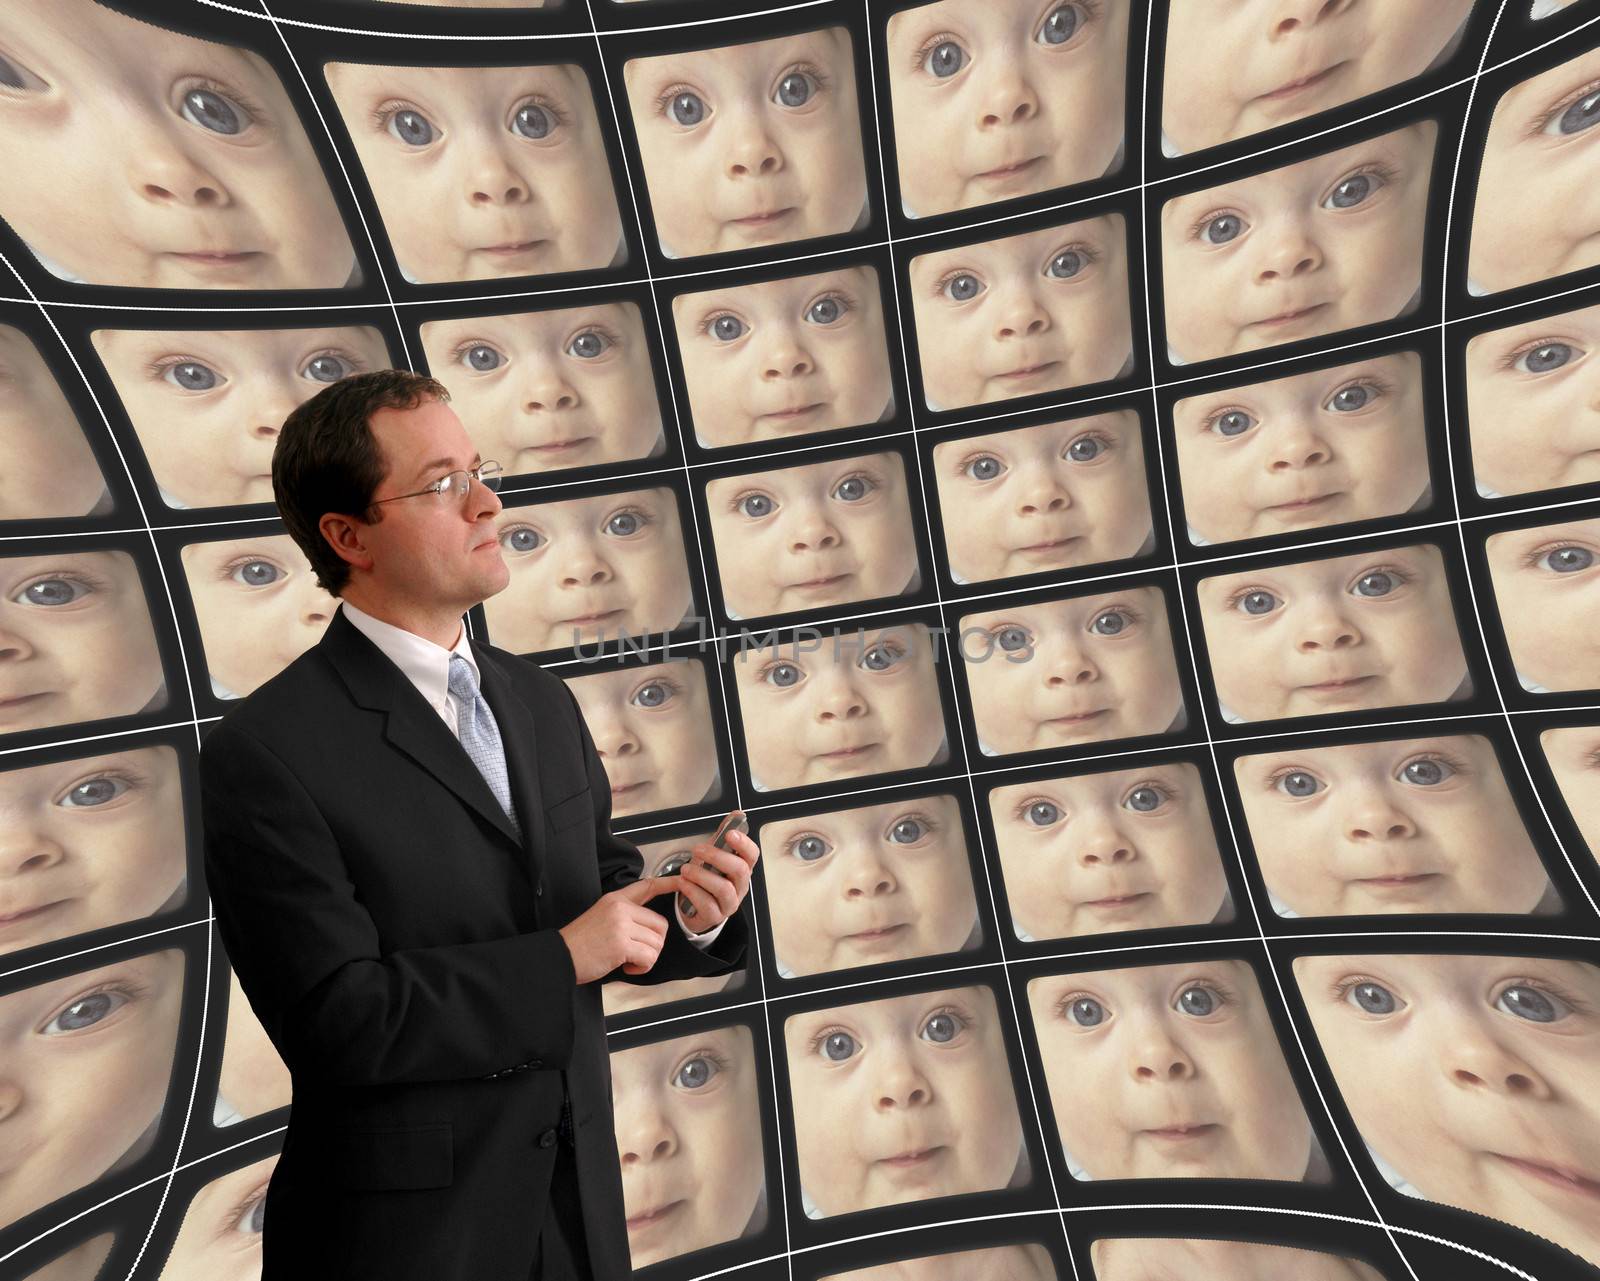 Man in suit monitoring babies on distorted video screens by Balefire9